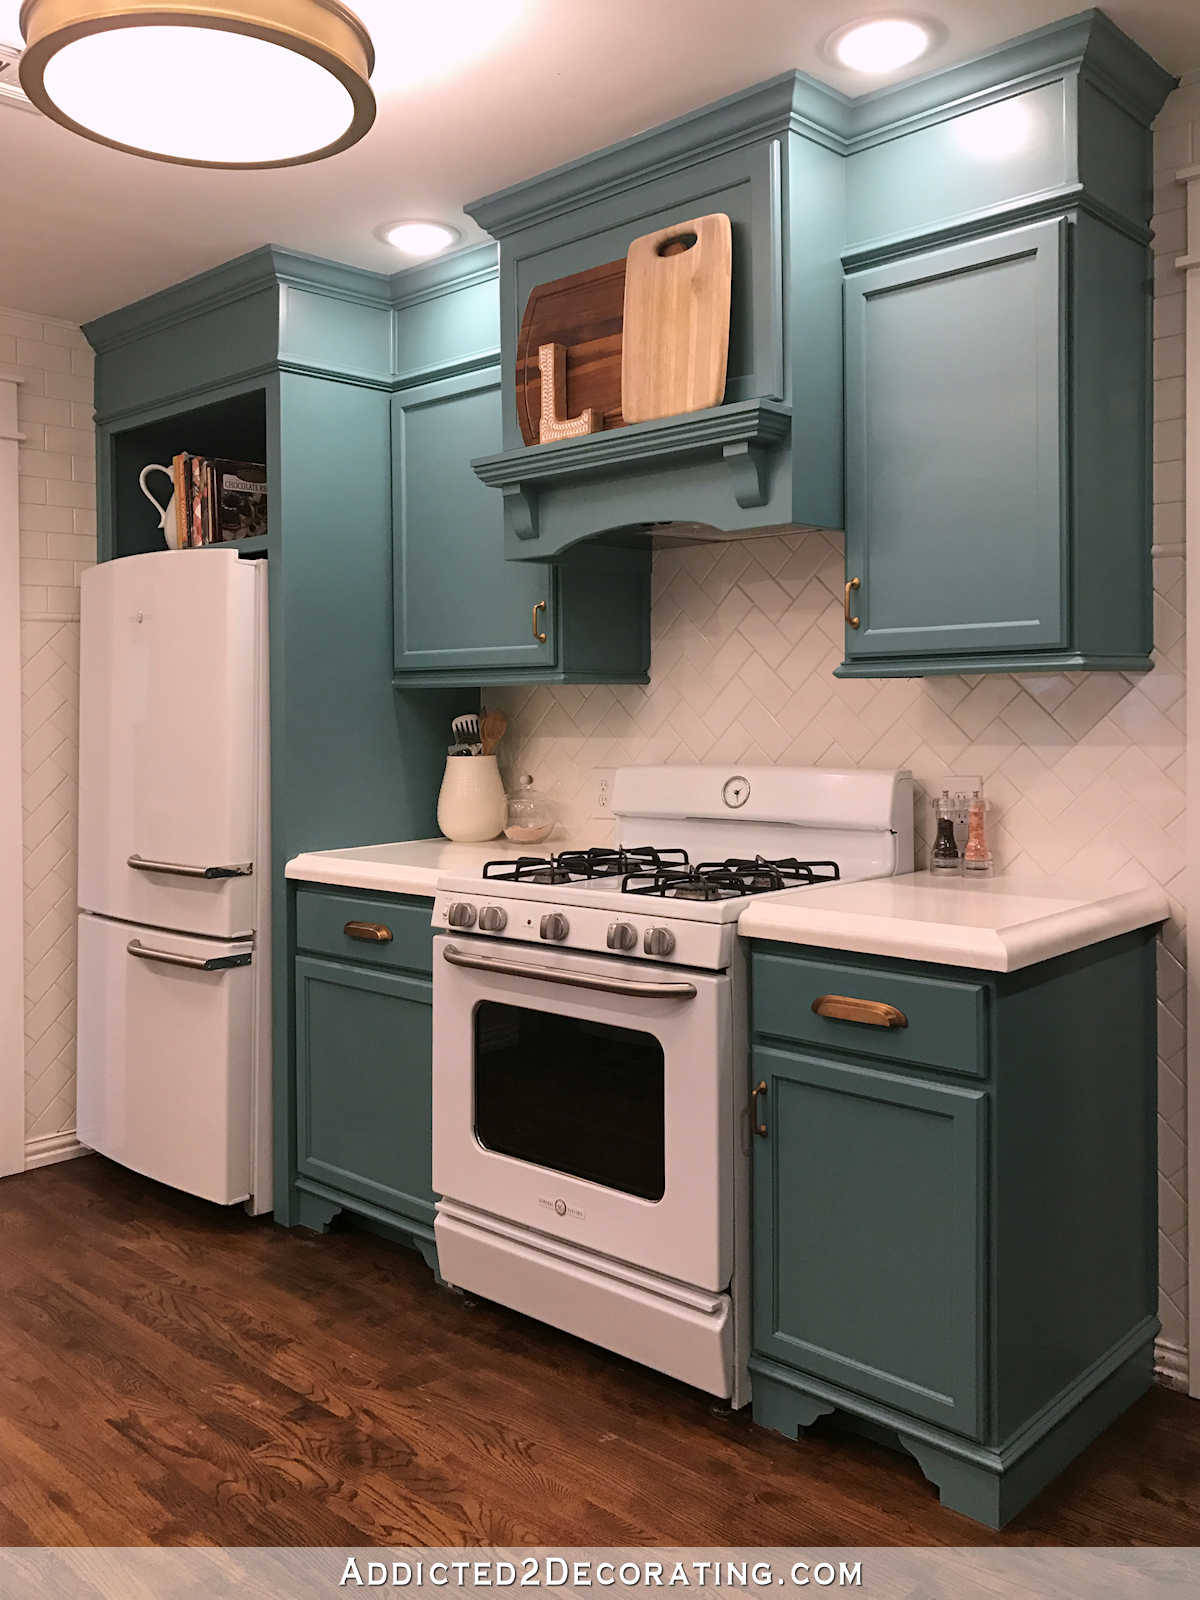 teal kitchen - range and refrgerator wall from back of kitchen